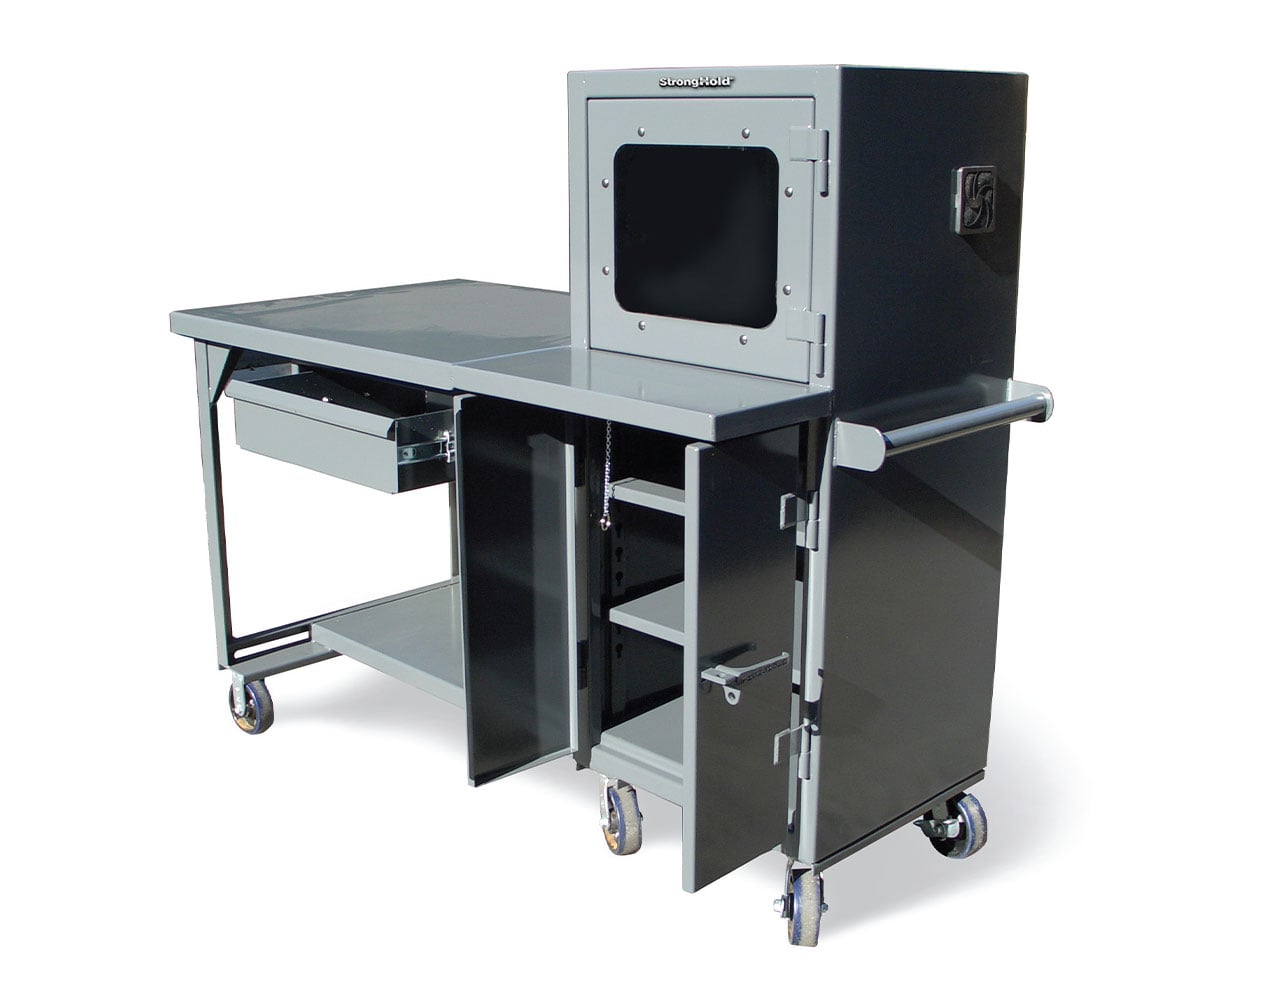 Extreme Duty 7 GA Mobile Industrial Shop Table with Computer Cabinet - 68 In. W x 36 In. D x 69 In. H